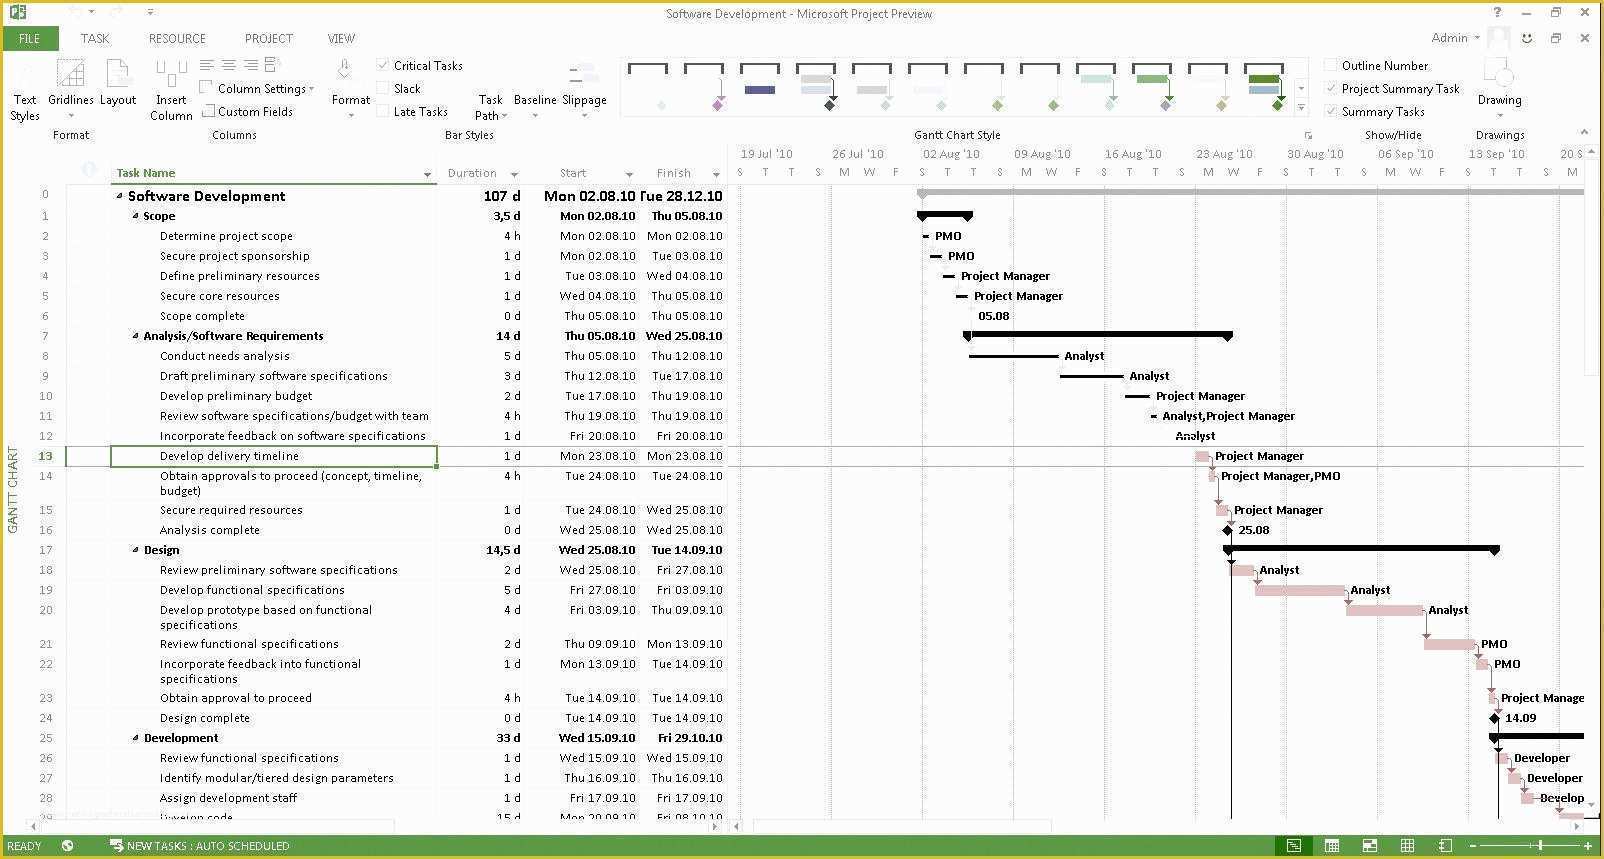 Free Ms Project Templates Of Download Microsoft Project Management software Template